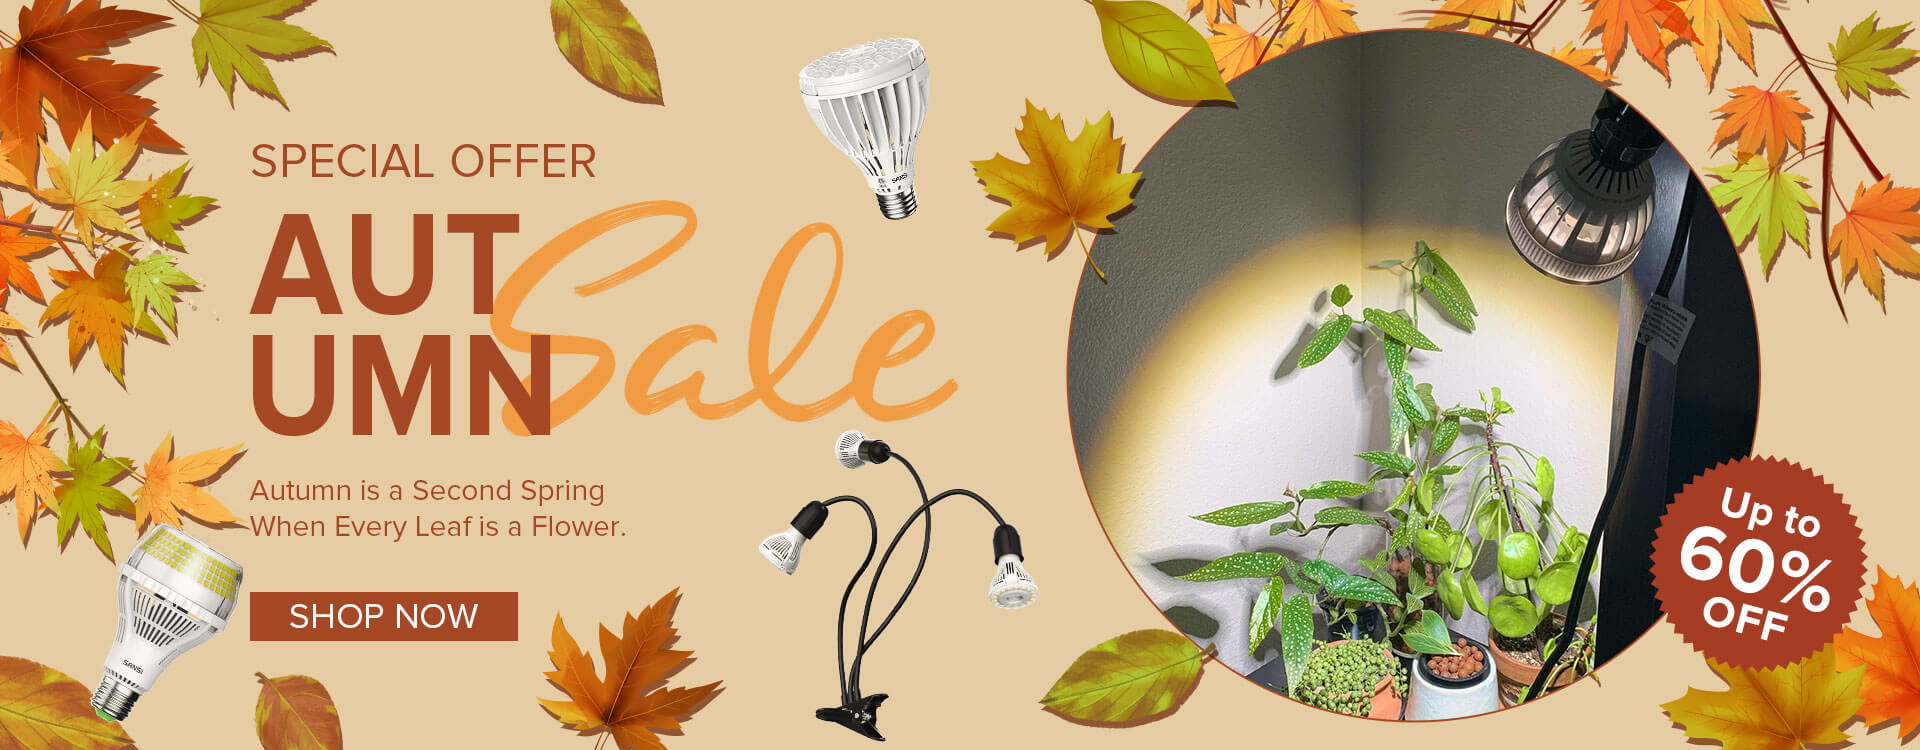 Special Offer Autumn Sale,Up To 60% OFF.